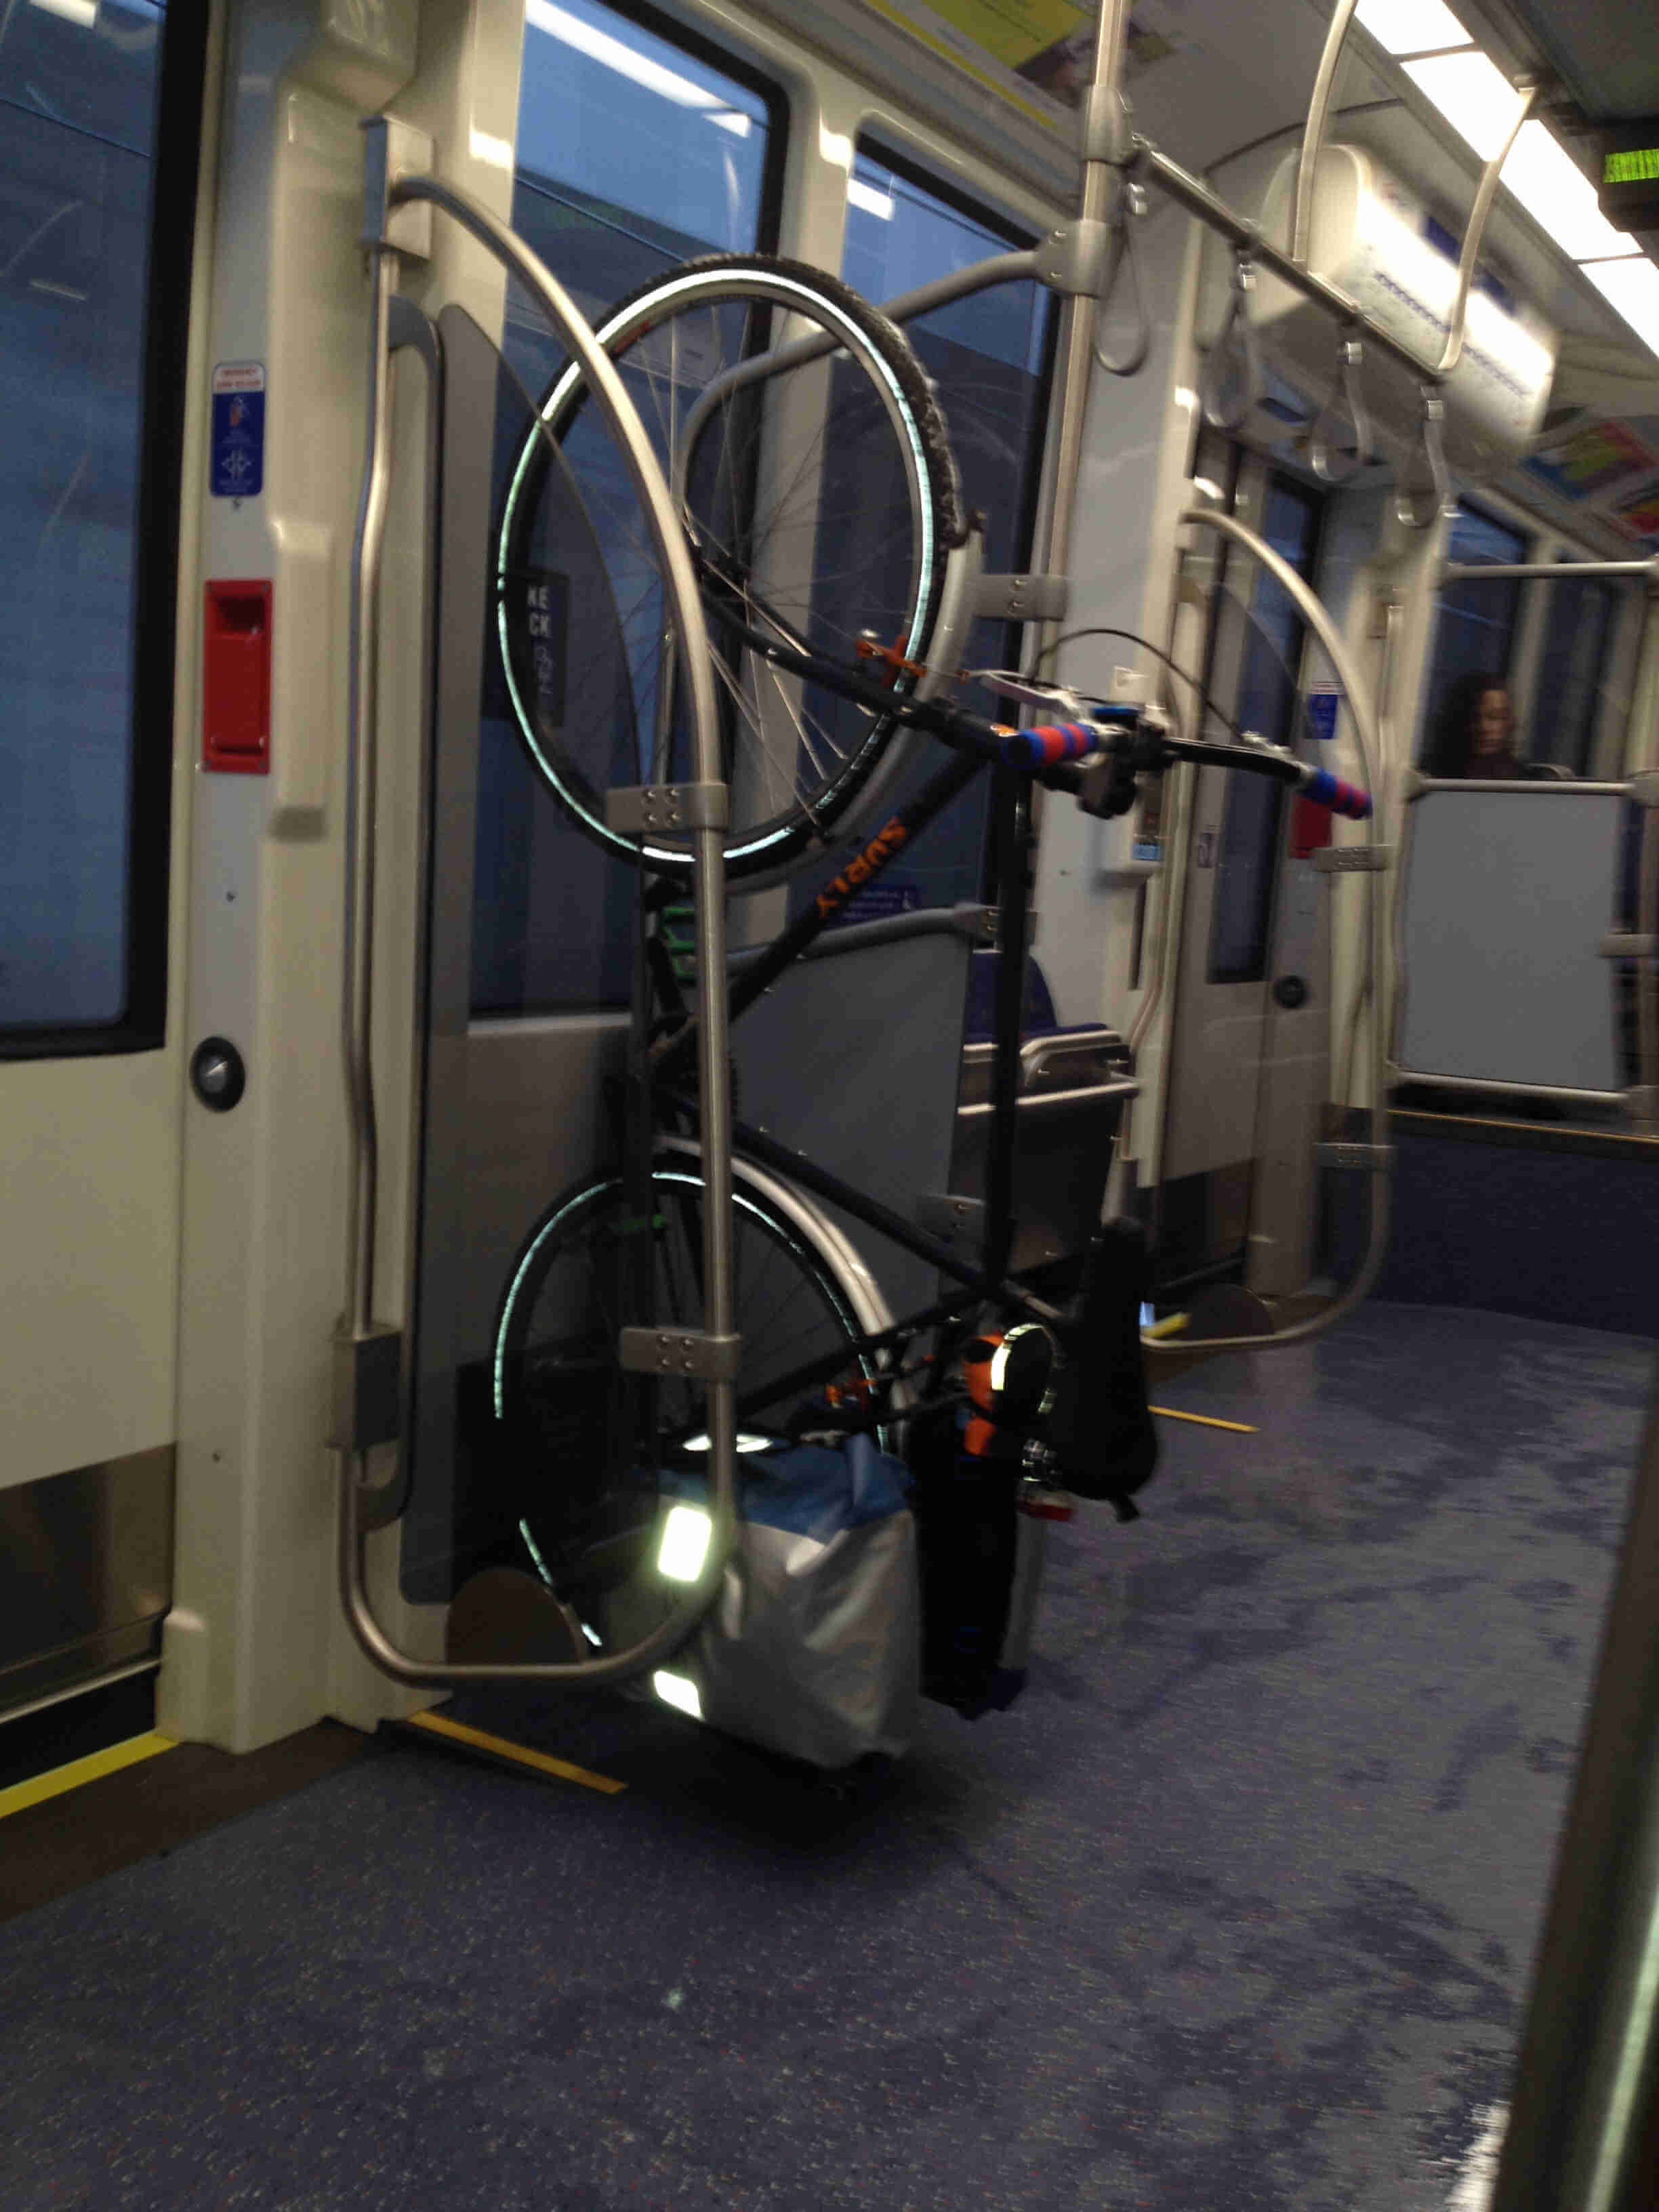 Left side of a black Surly bike with fenders, standing up vertically, inside of a city rail car